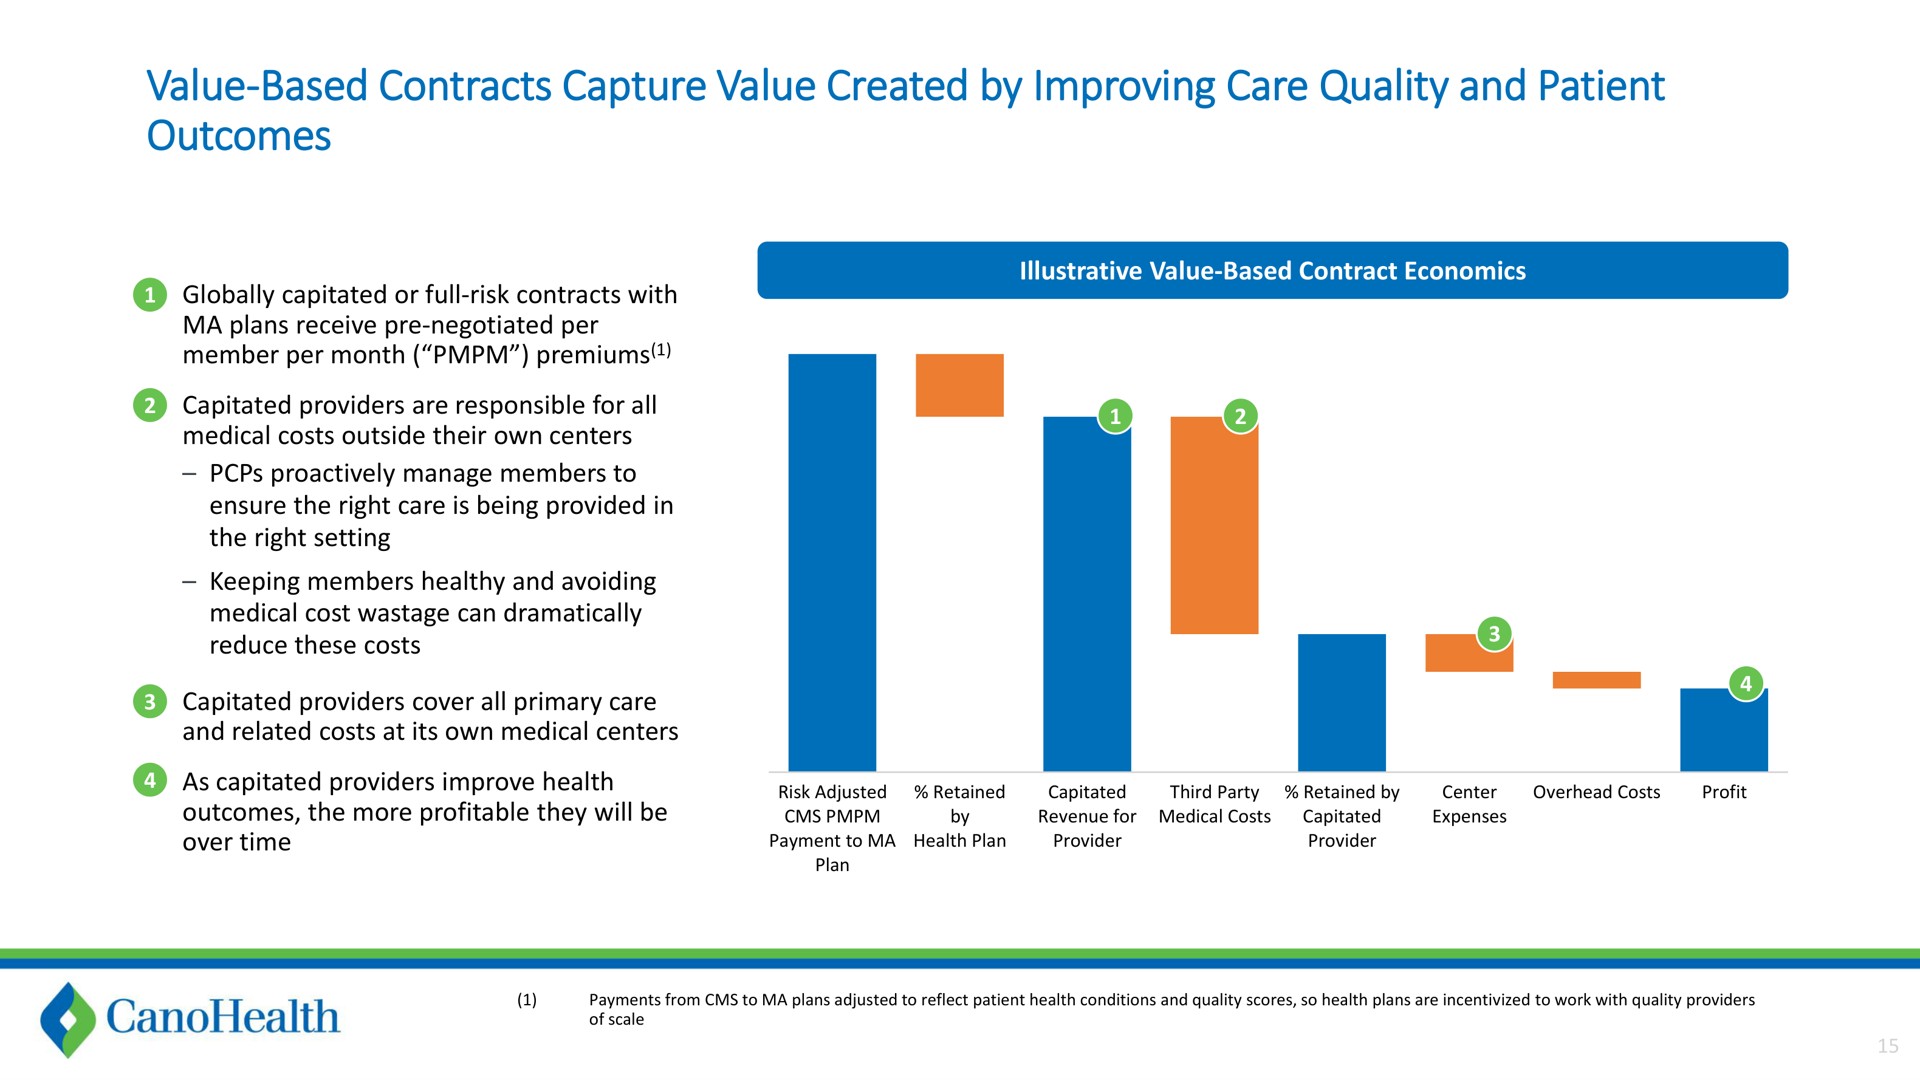 value based contracts capture value created by improving care quality and patient outcomes | Cano Health